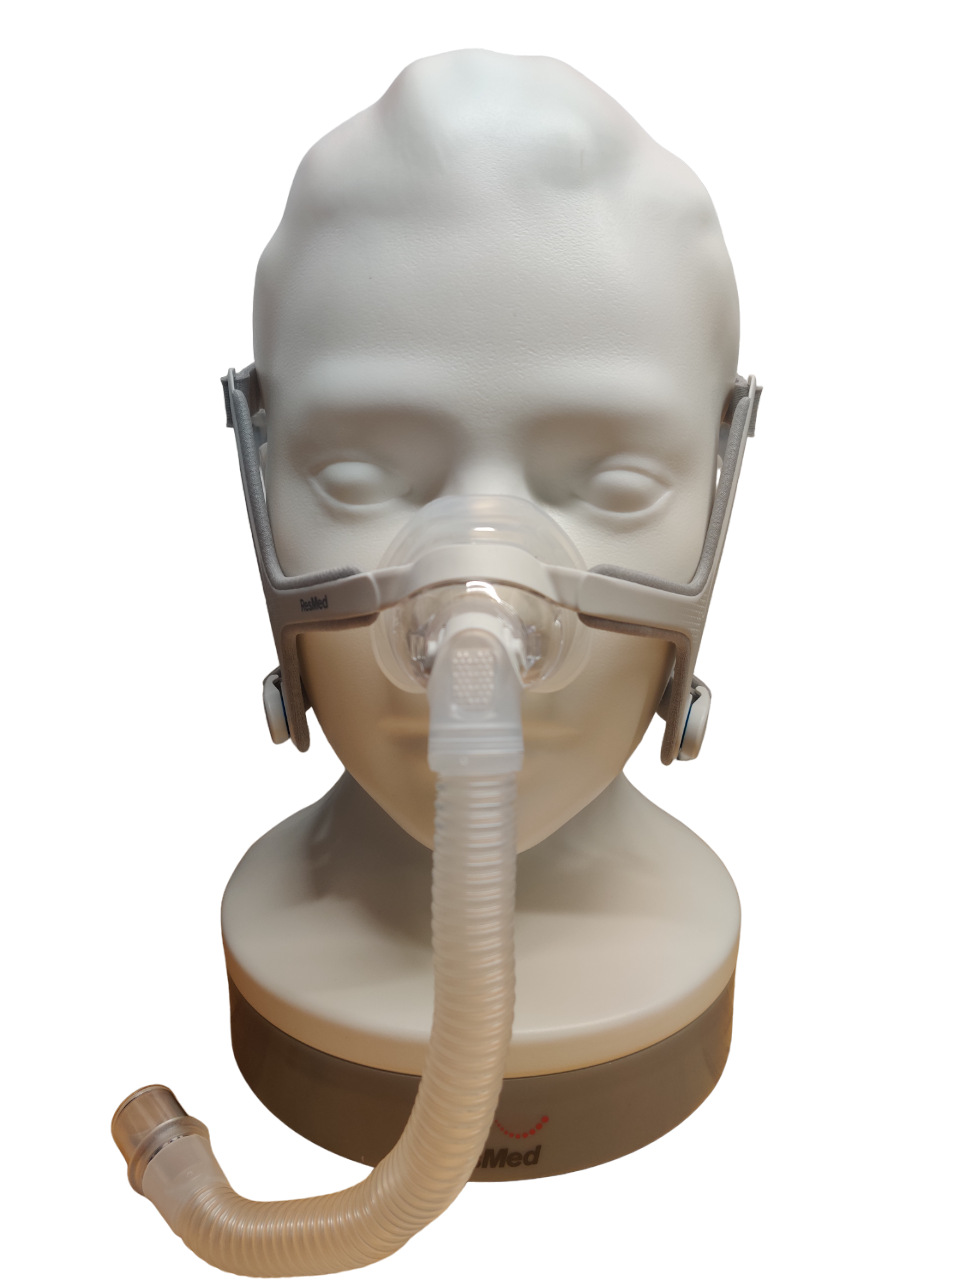 Eson 2 Nasal Cpap Mask with Headgear